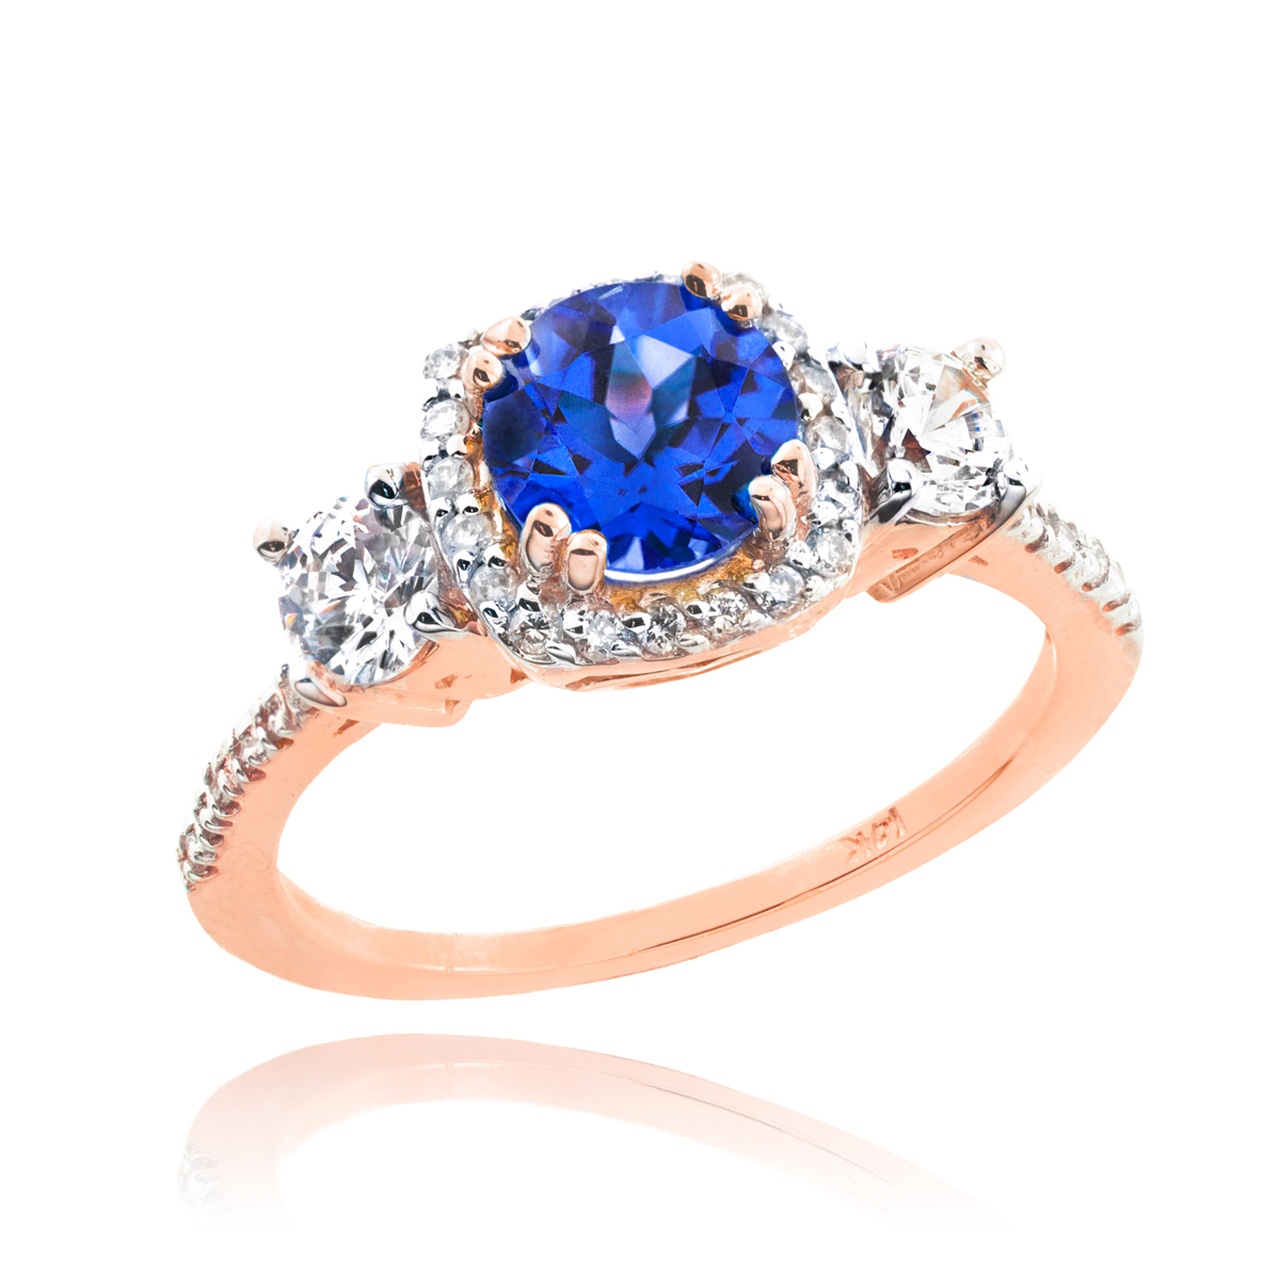 Sapphire Rings- The Best Rings In the Market : Gem